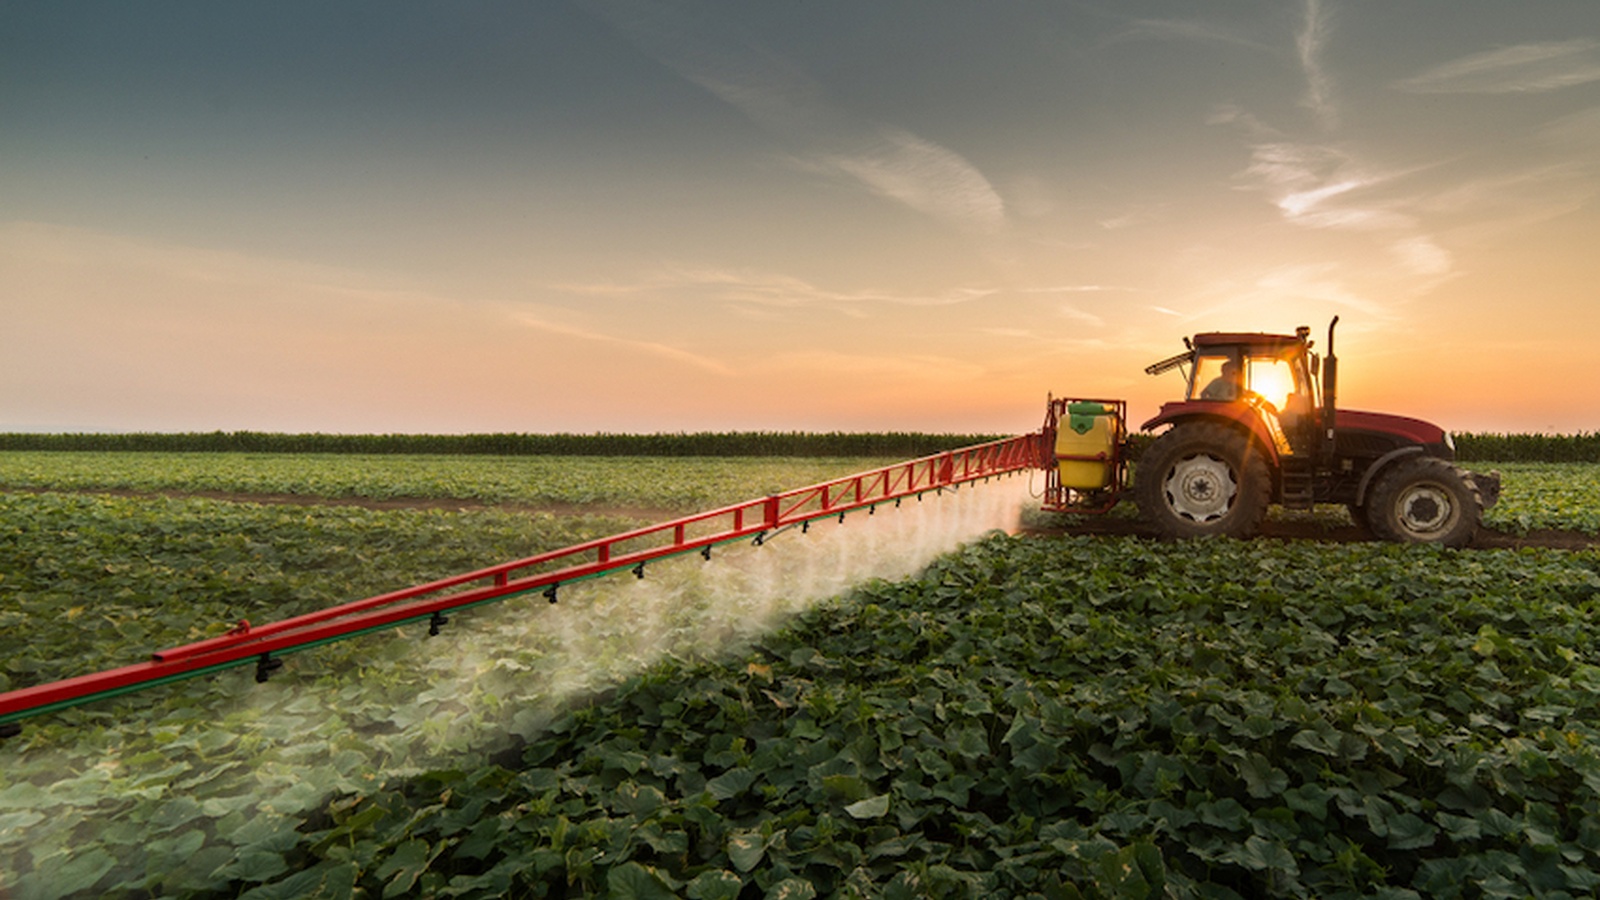 Harmful Herbicides - The Research Round-Up On Roundup